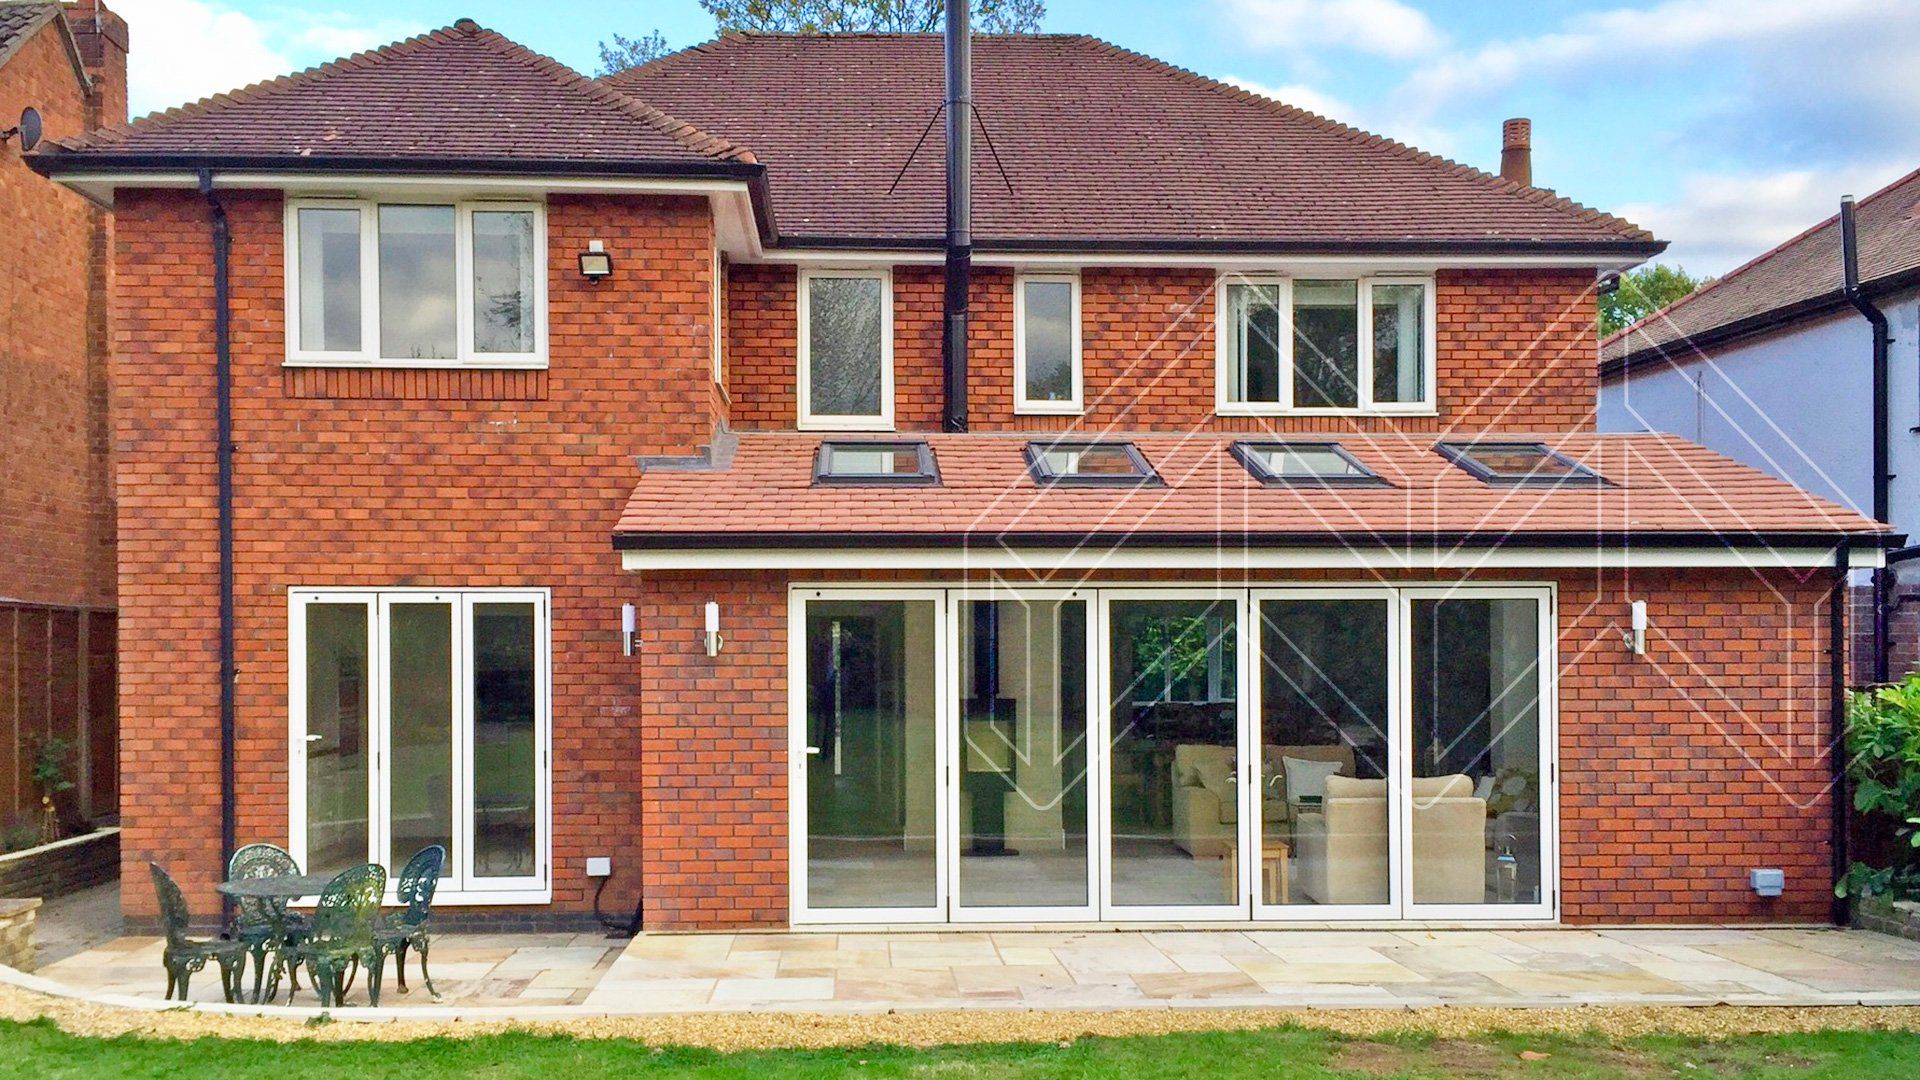 Find out more about rear extensions from Mark Davenport Builders